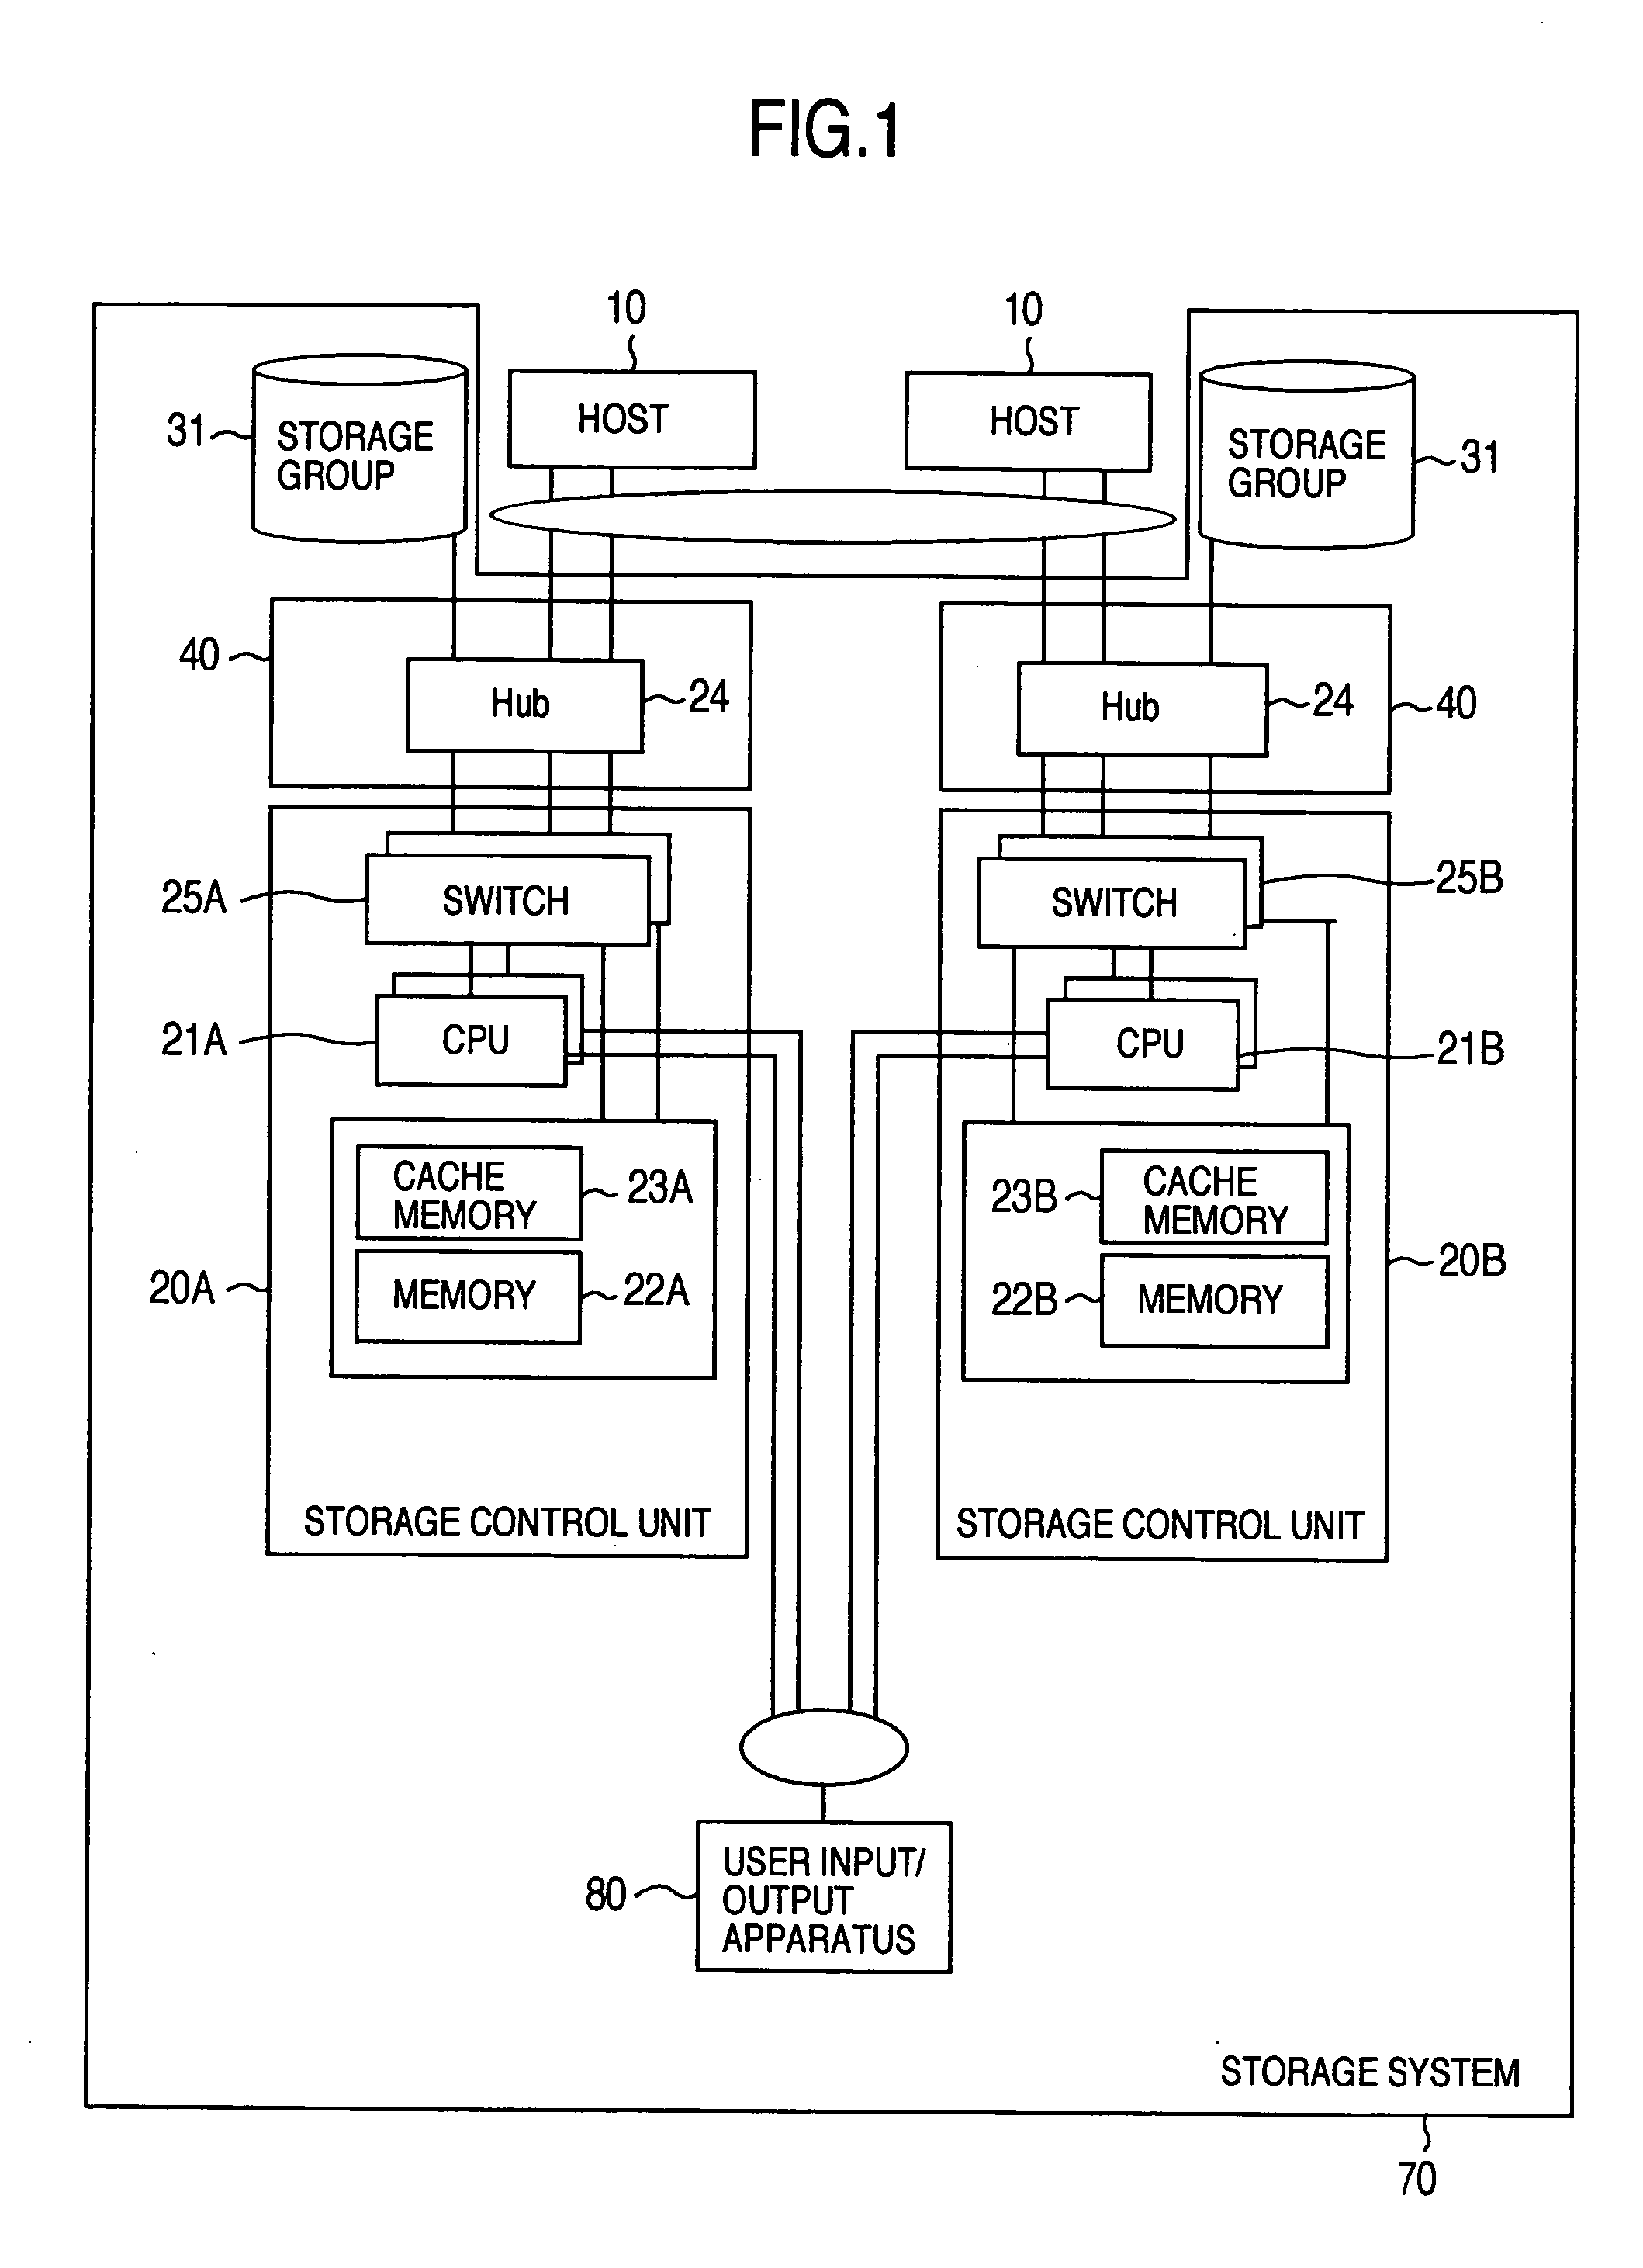 Data replication in a storage system